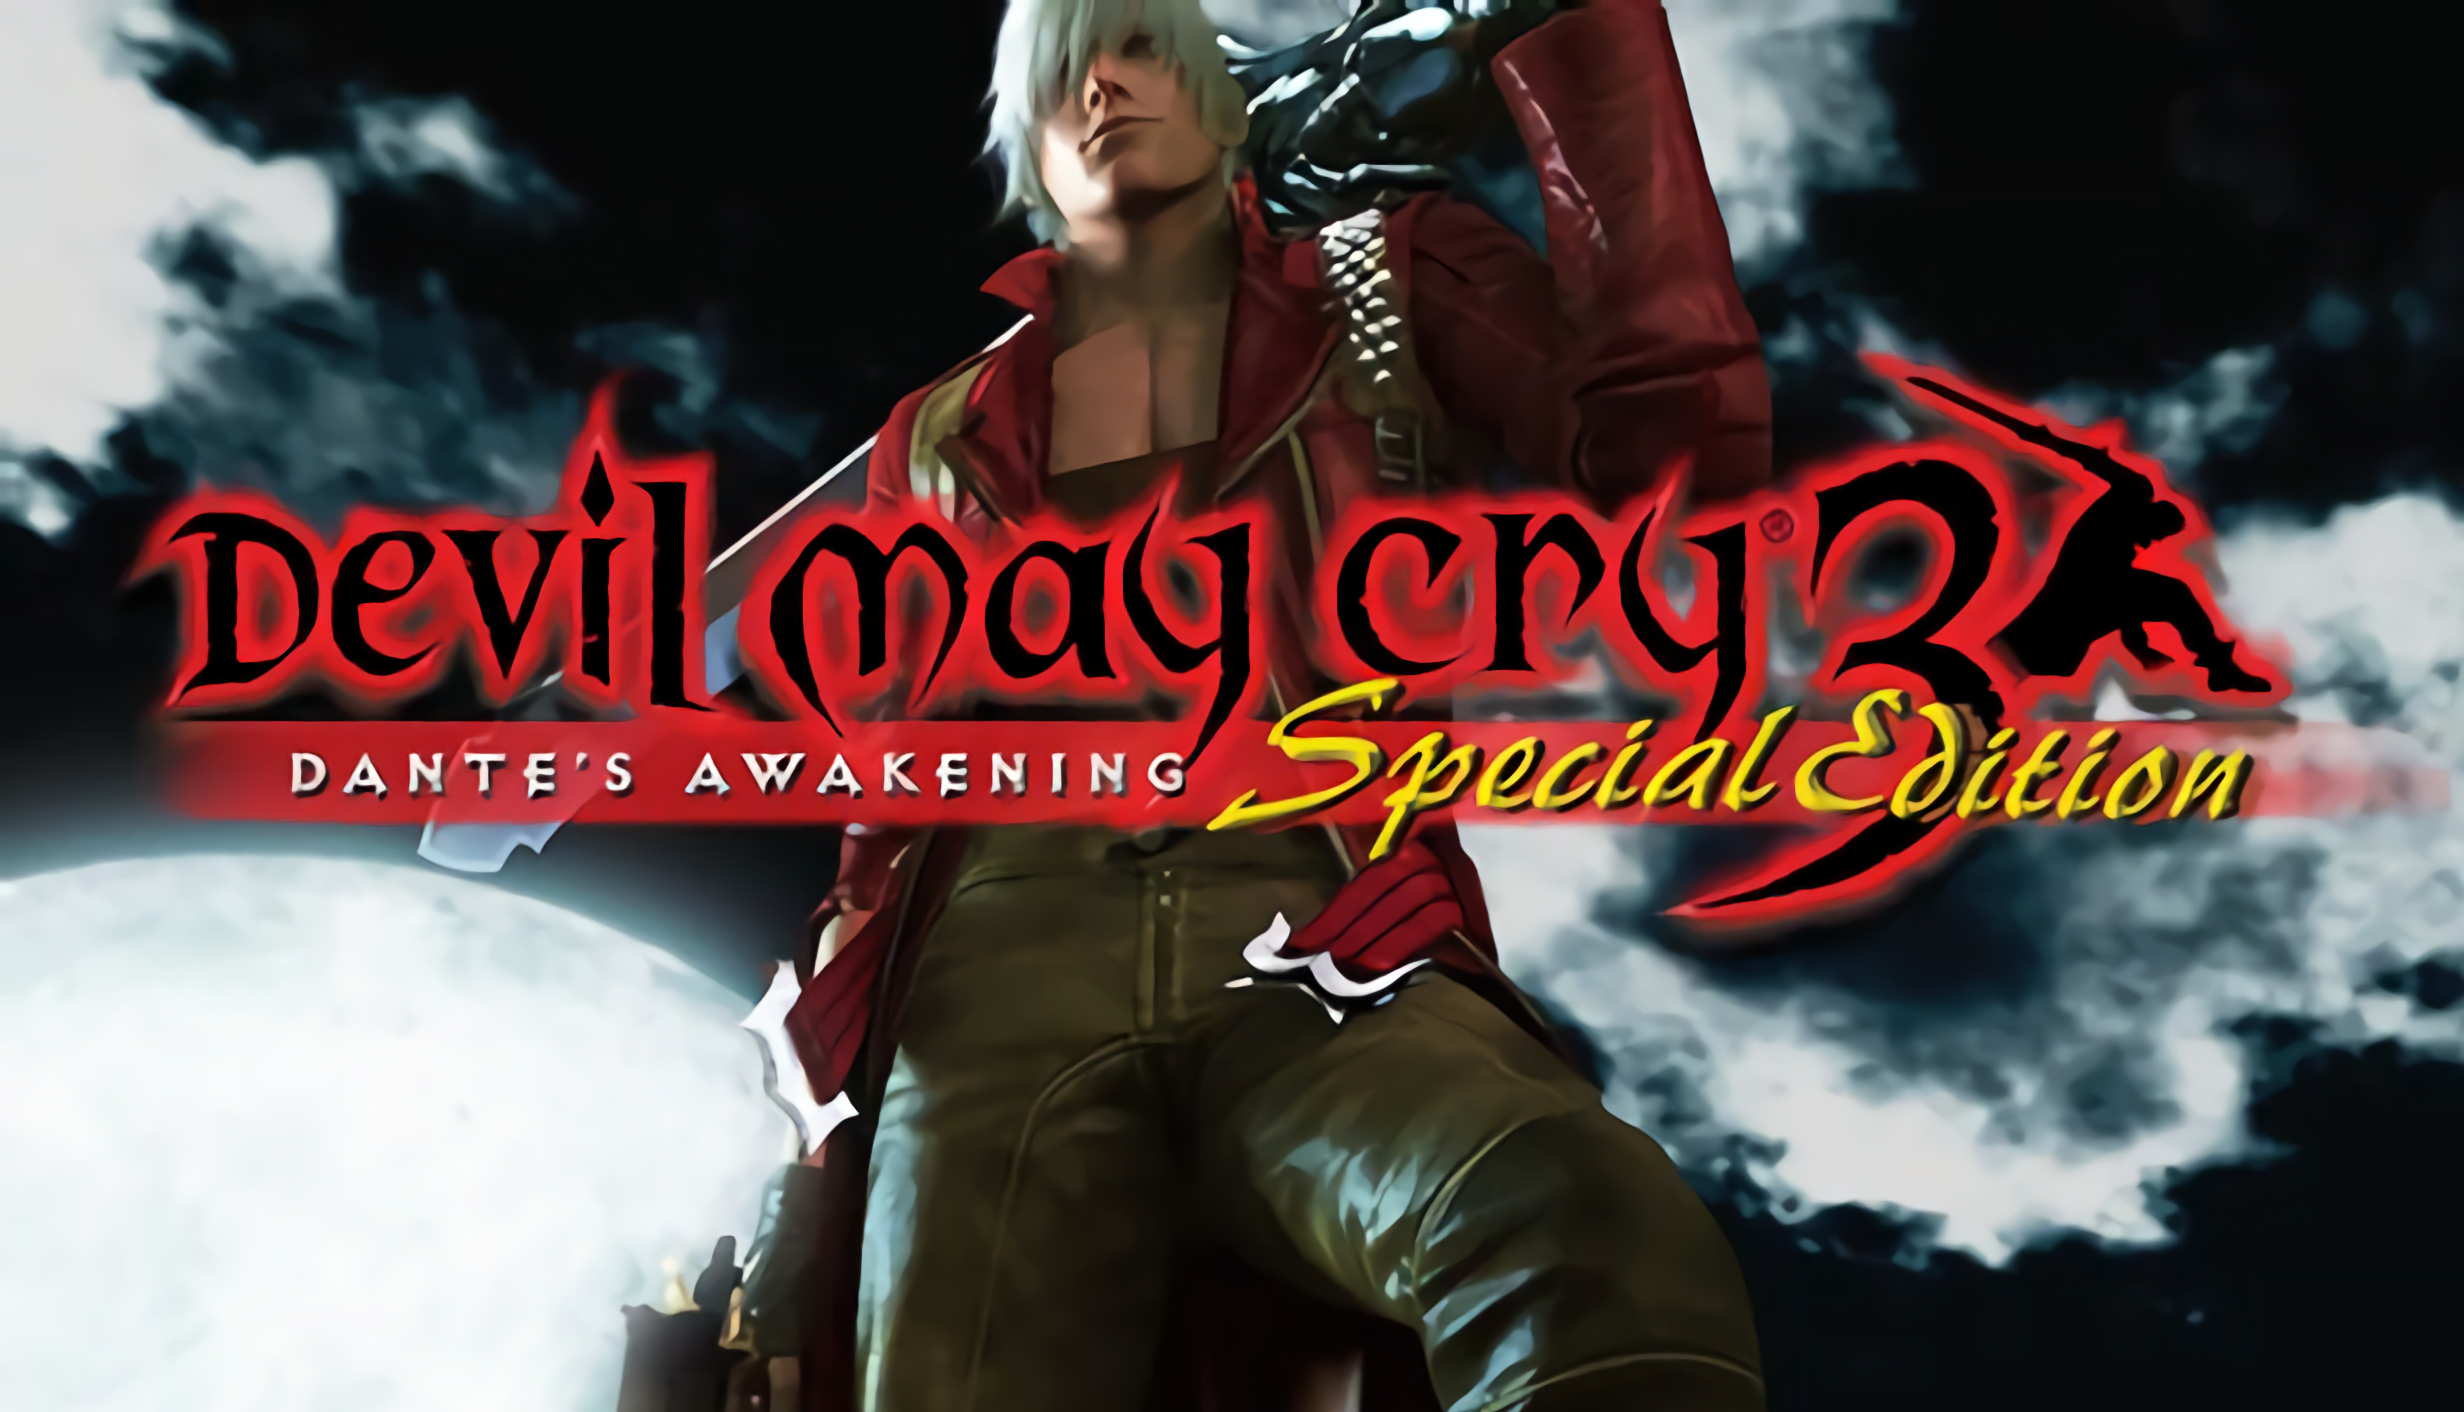 DMC 3 Special Edition. Devil May Cry 3. Devil May Cry 3 Special Edition ps2. DMC 3 Dante's Awakening. Dmc 3 special